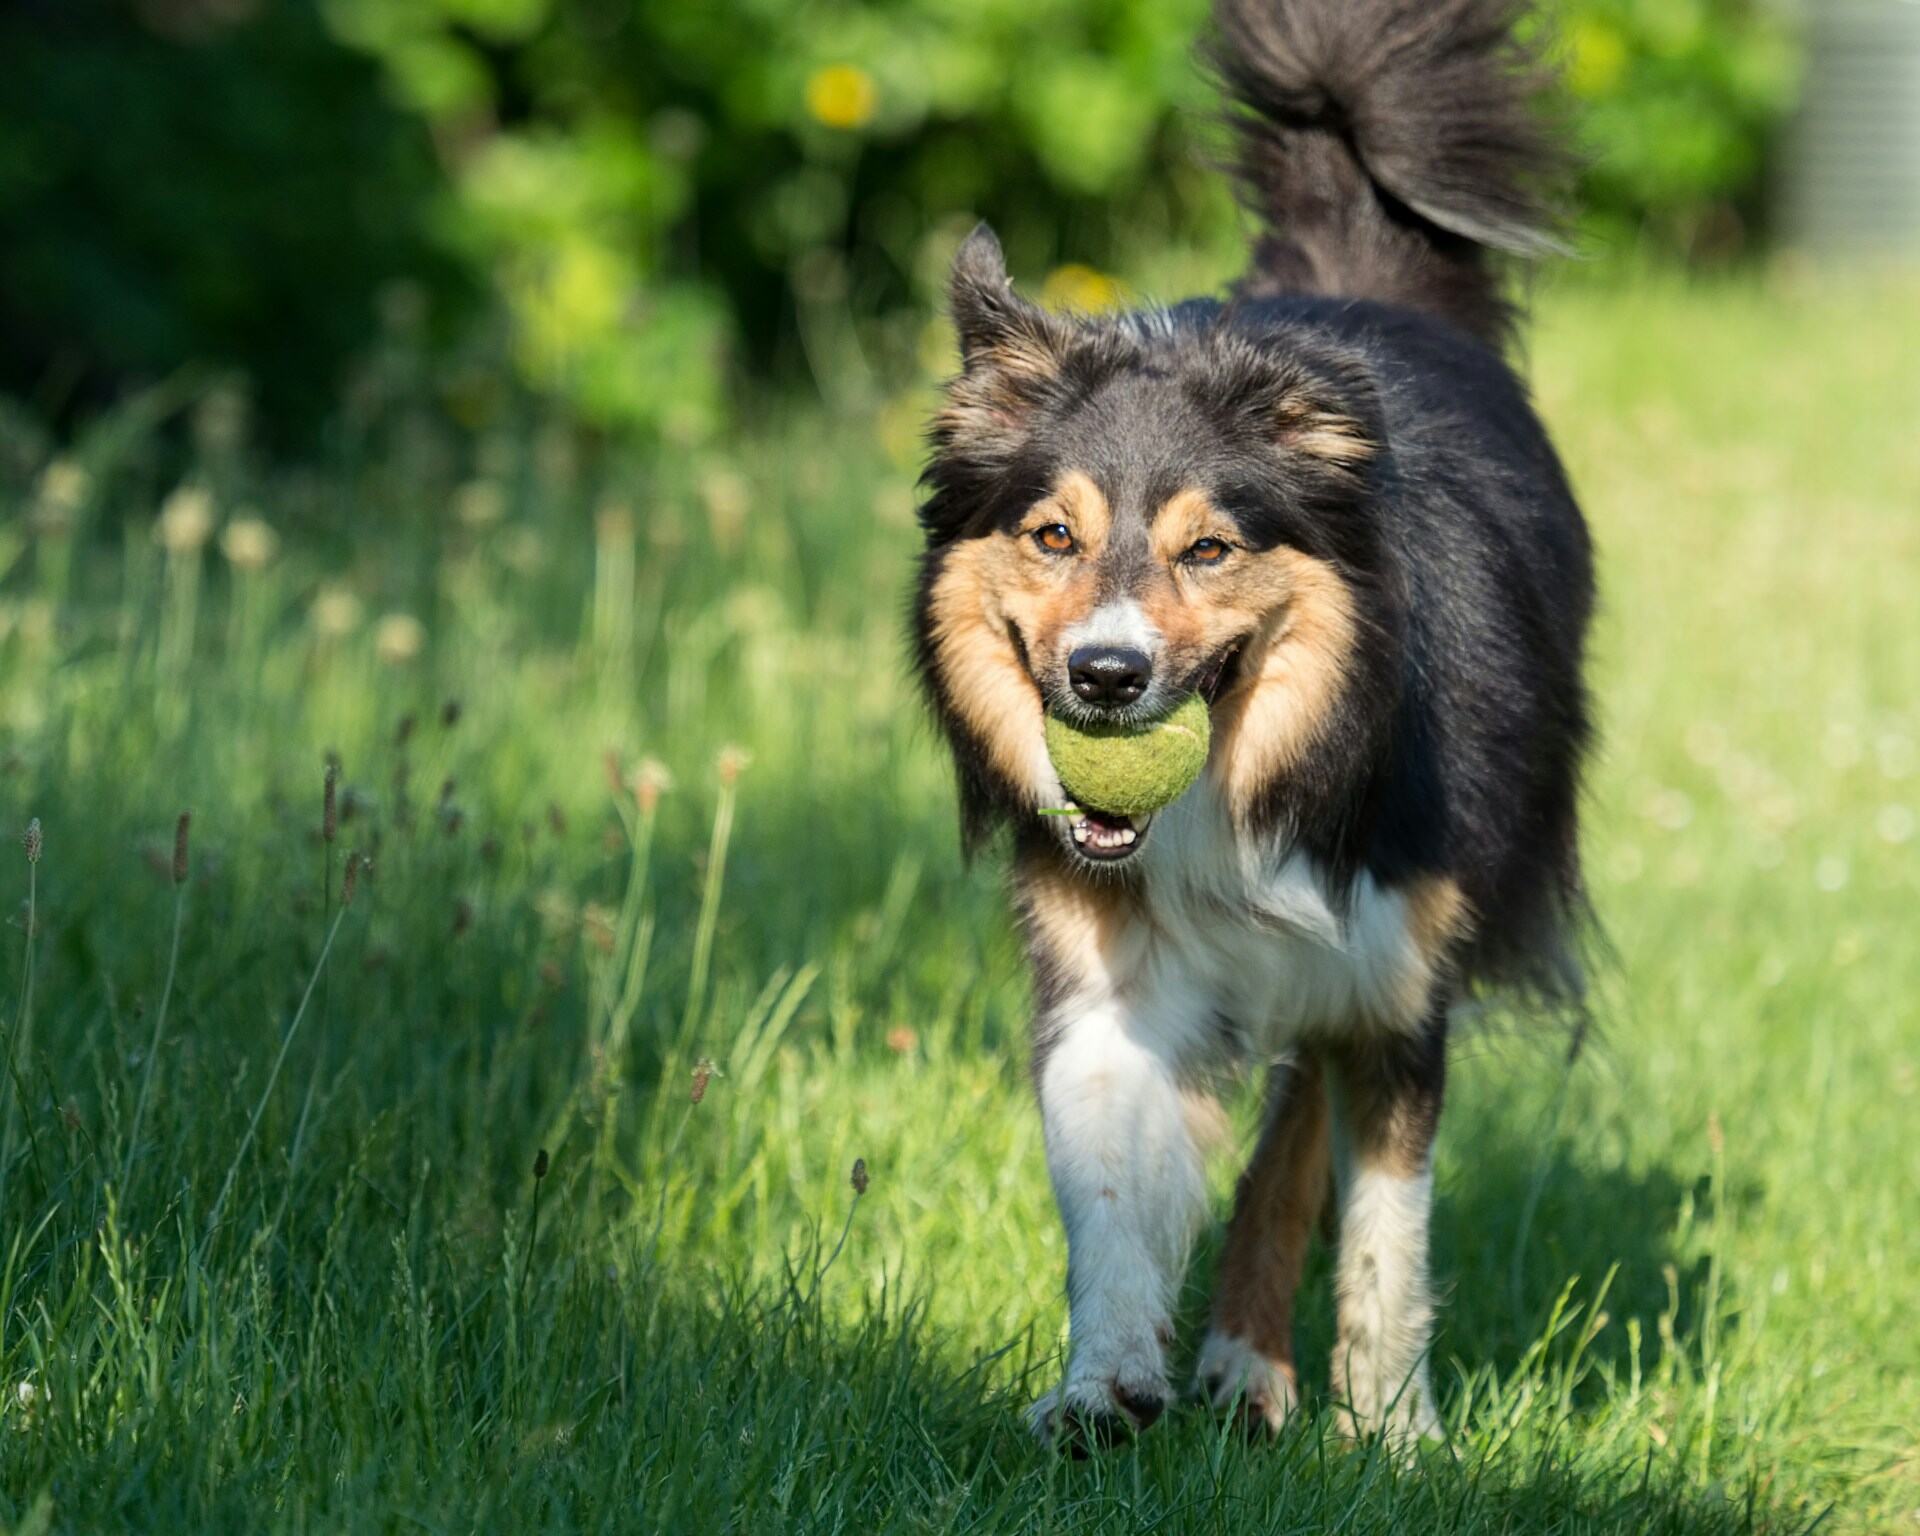 A dog playing a game of fetch with a green ball in their mouth